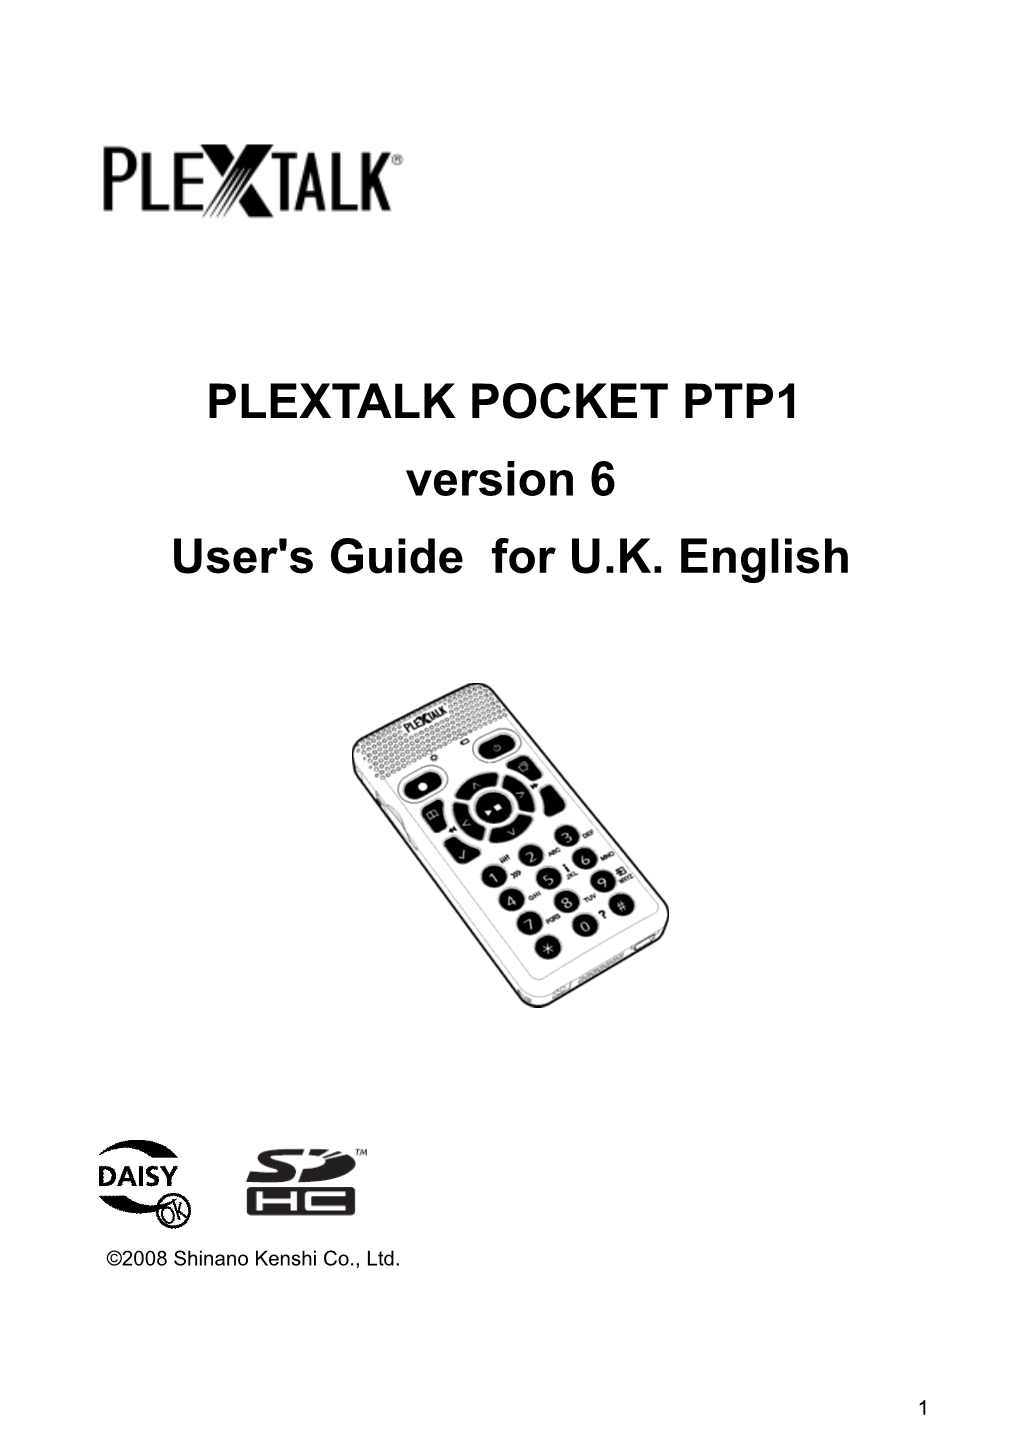 User's Guide for U.K. English